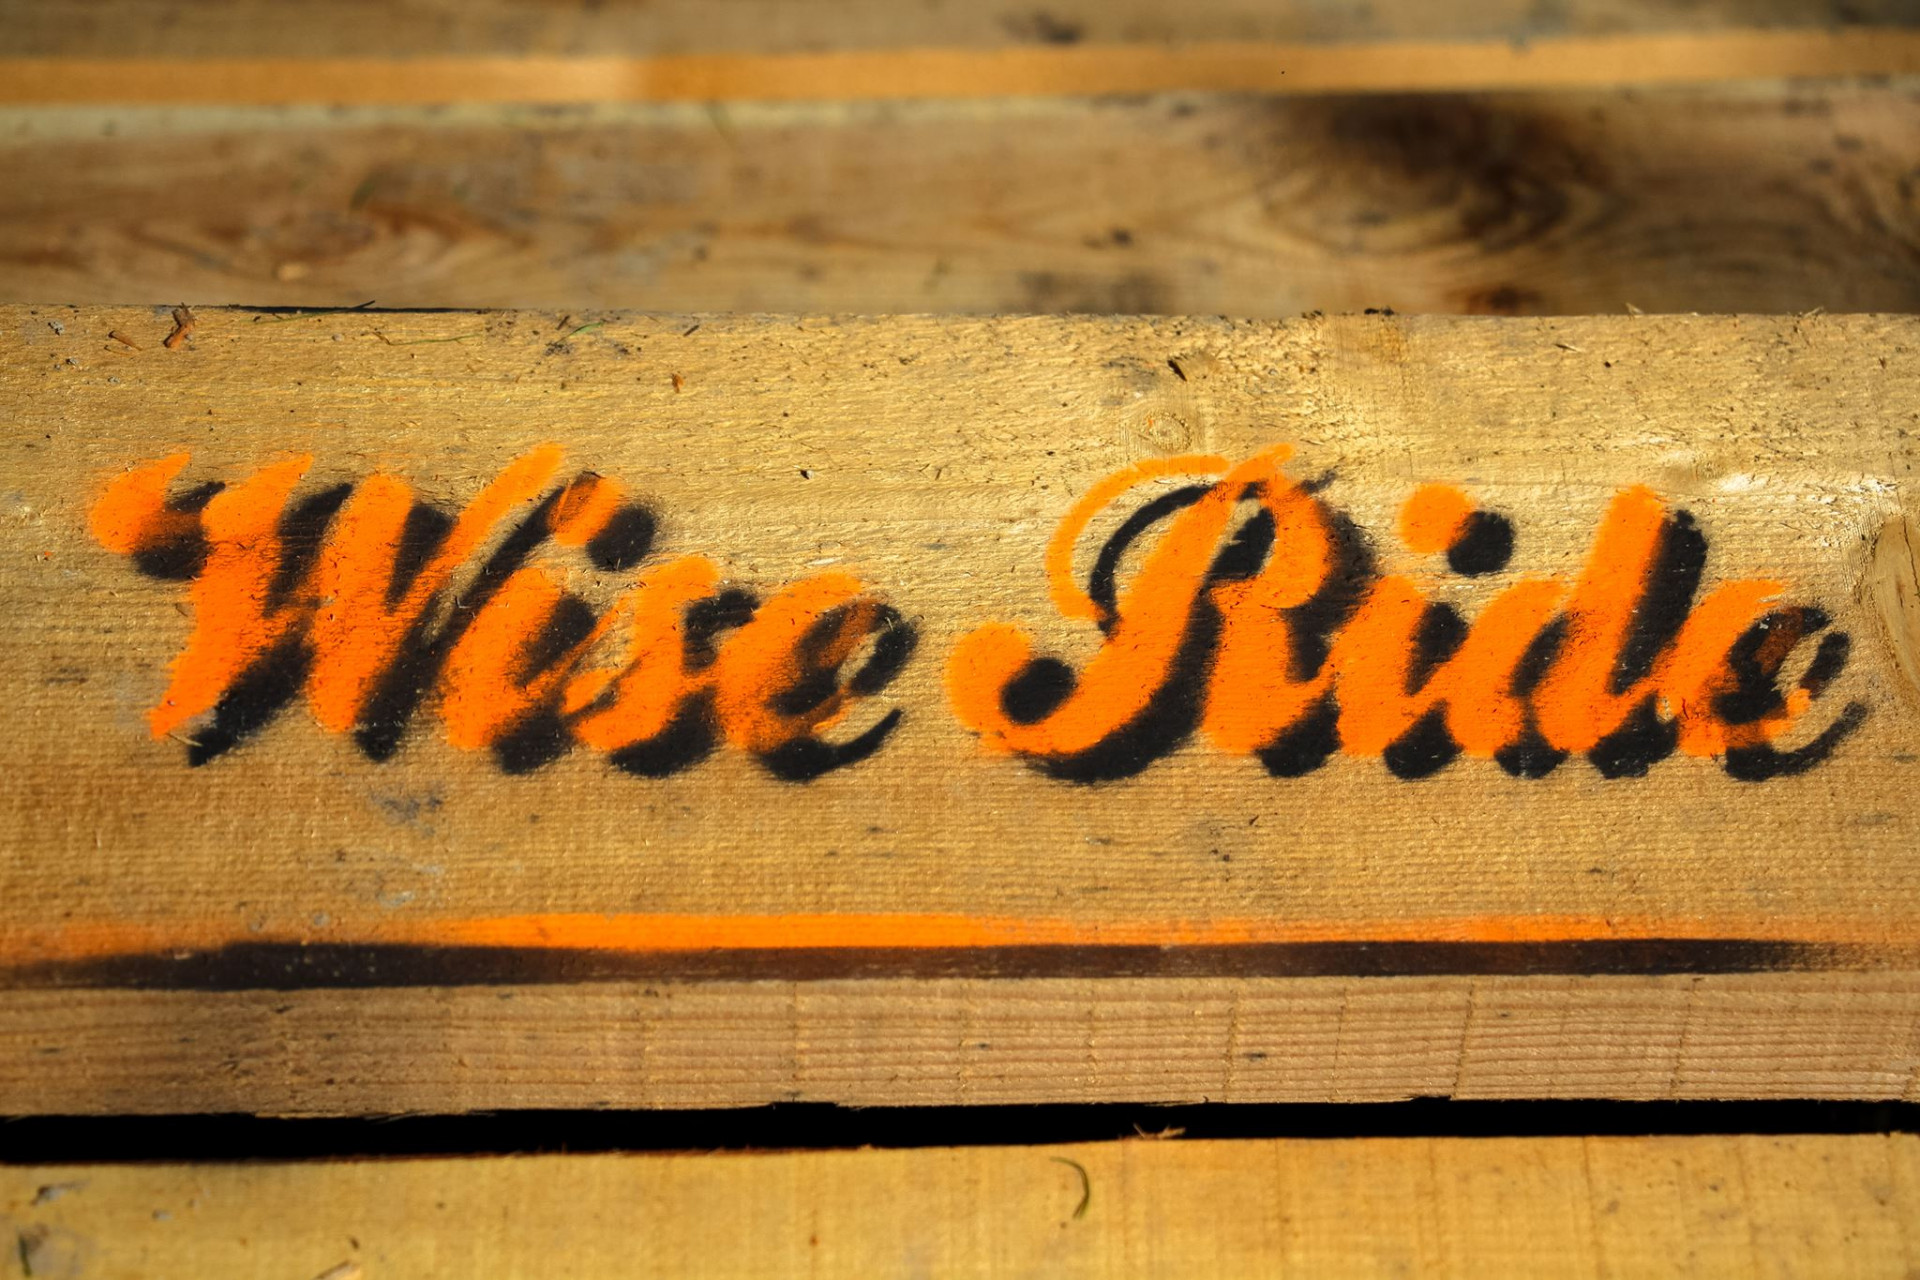 Wise ride